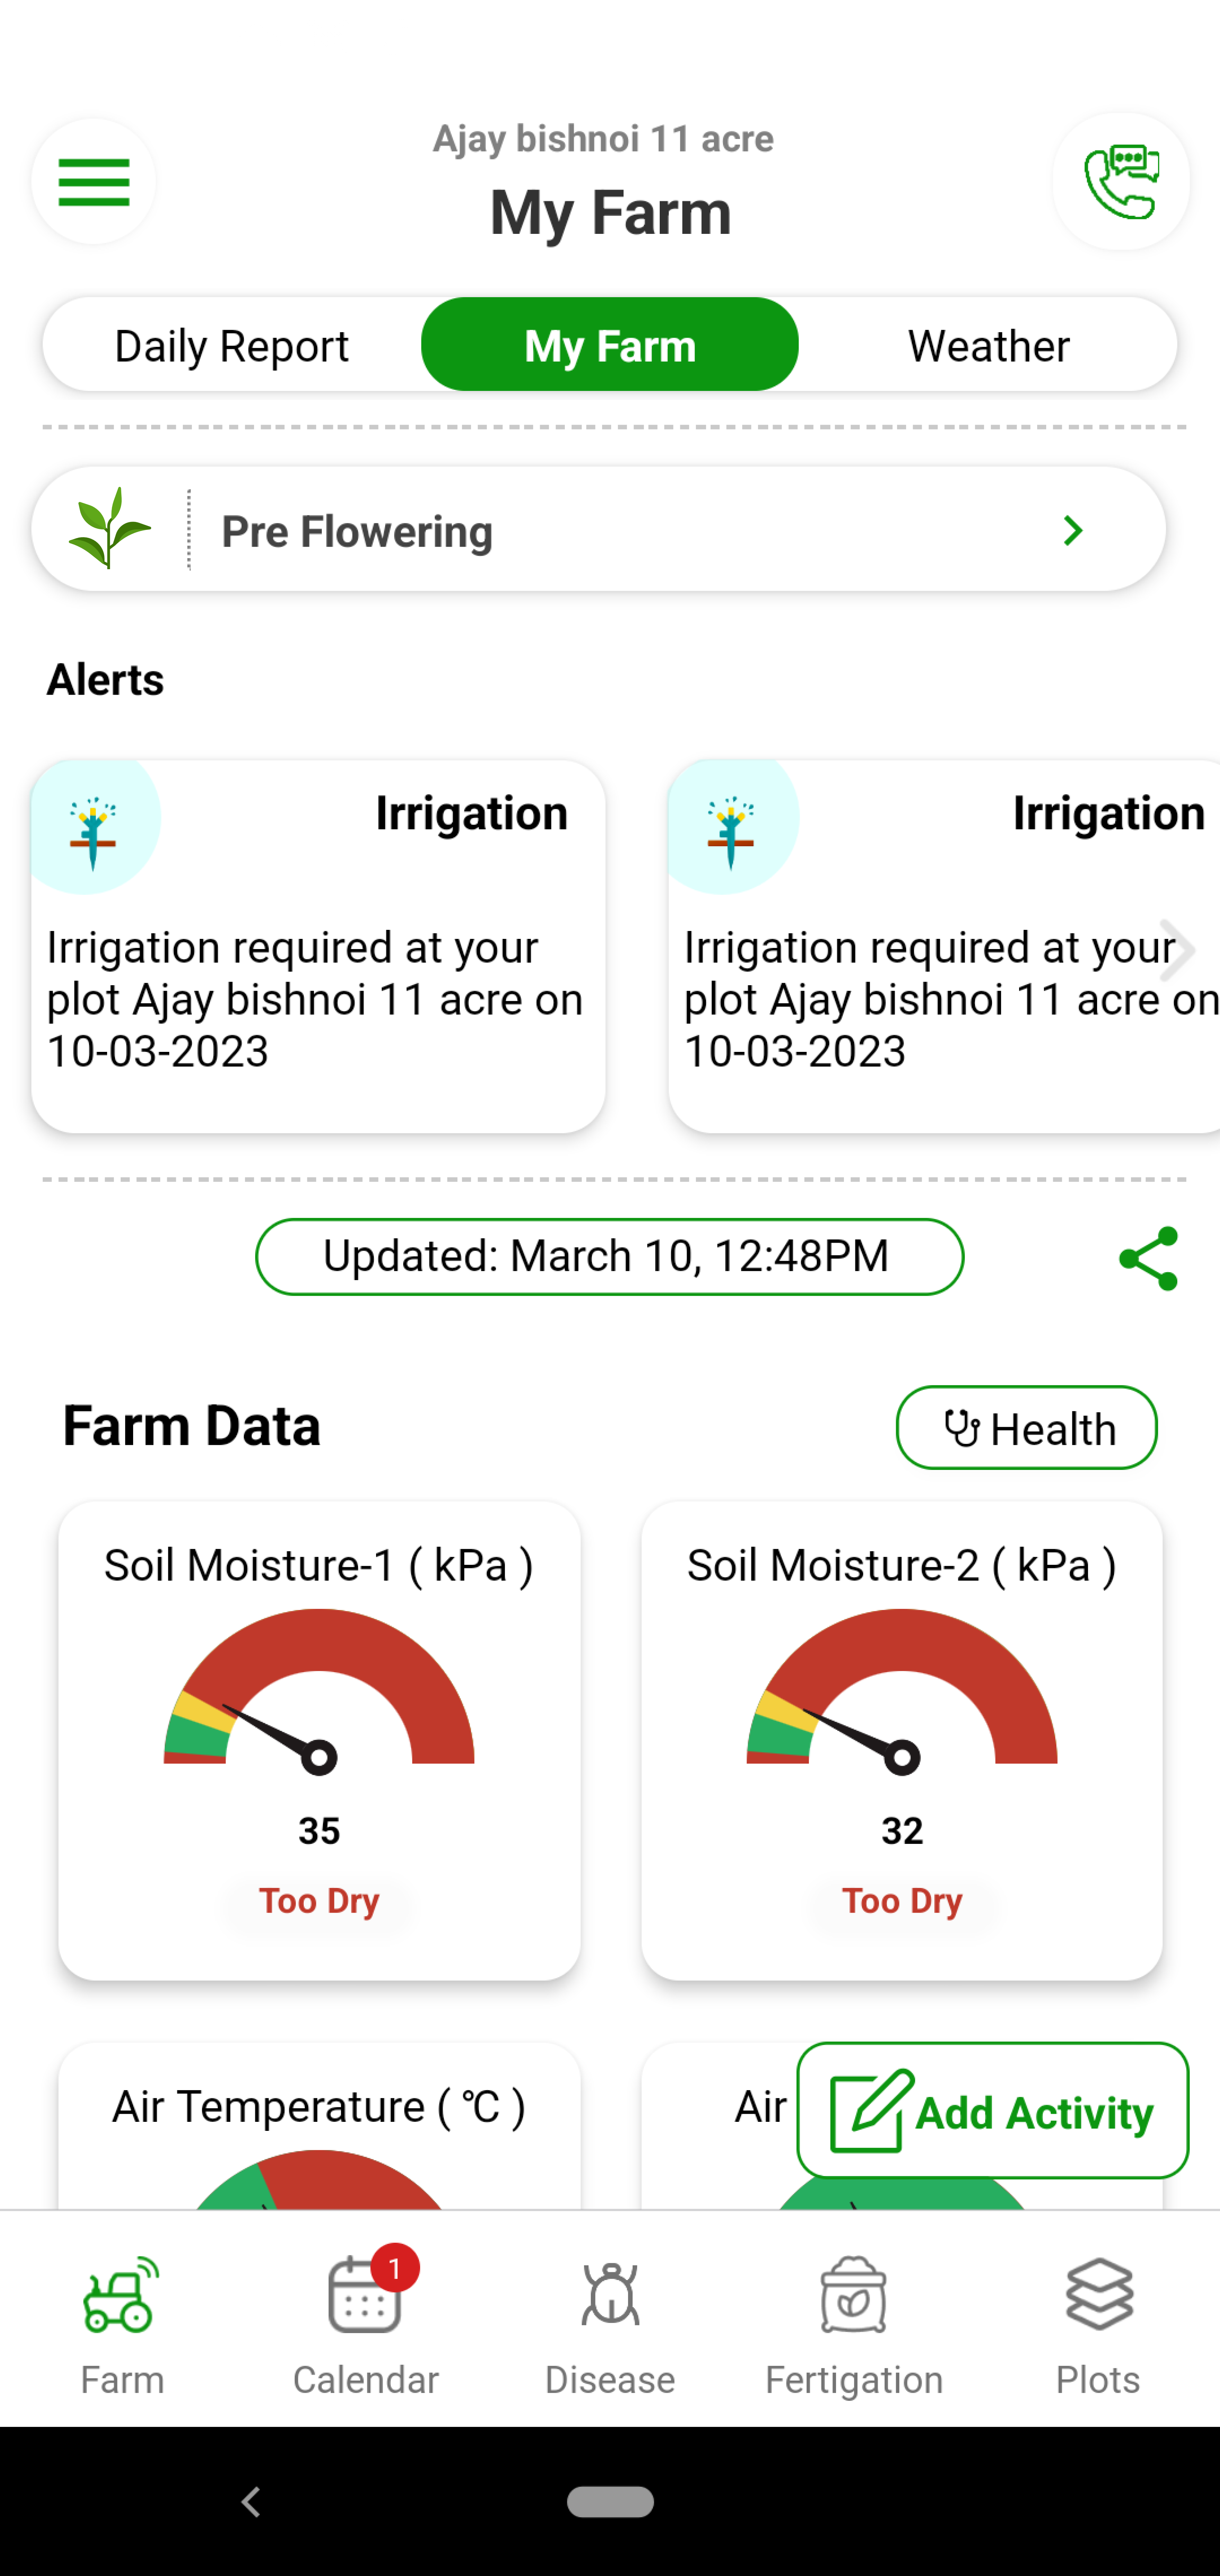 Precise irrigation given to the tea can help you get the best quality leaves from the bushes. Over irrigation leads to wilting in the plants. Tea’s water requirements vary based on soil type and stage. With Fyllo’s device containing soil moisture and soil temperature sensor and intelligent software, you get alerts on how much water to provide to the crop. You can also see and visualize evapotranspiration (Etc) values of the crop. You can perfectly manage the water requirements to get the perfect size, color and sugar.